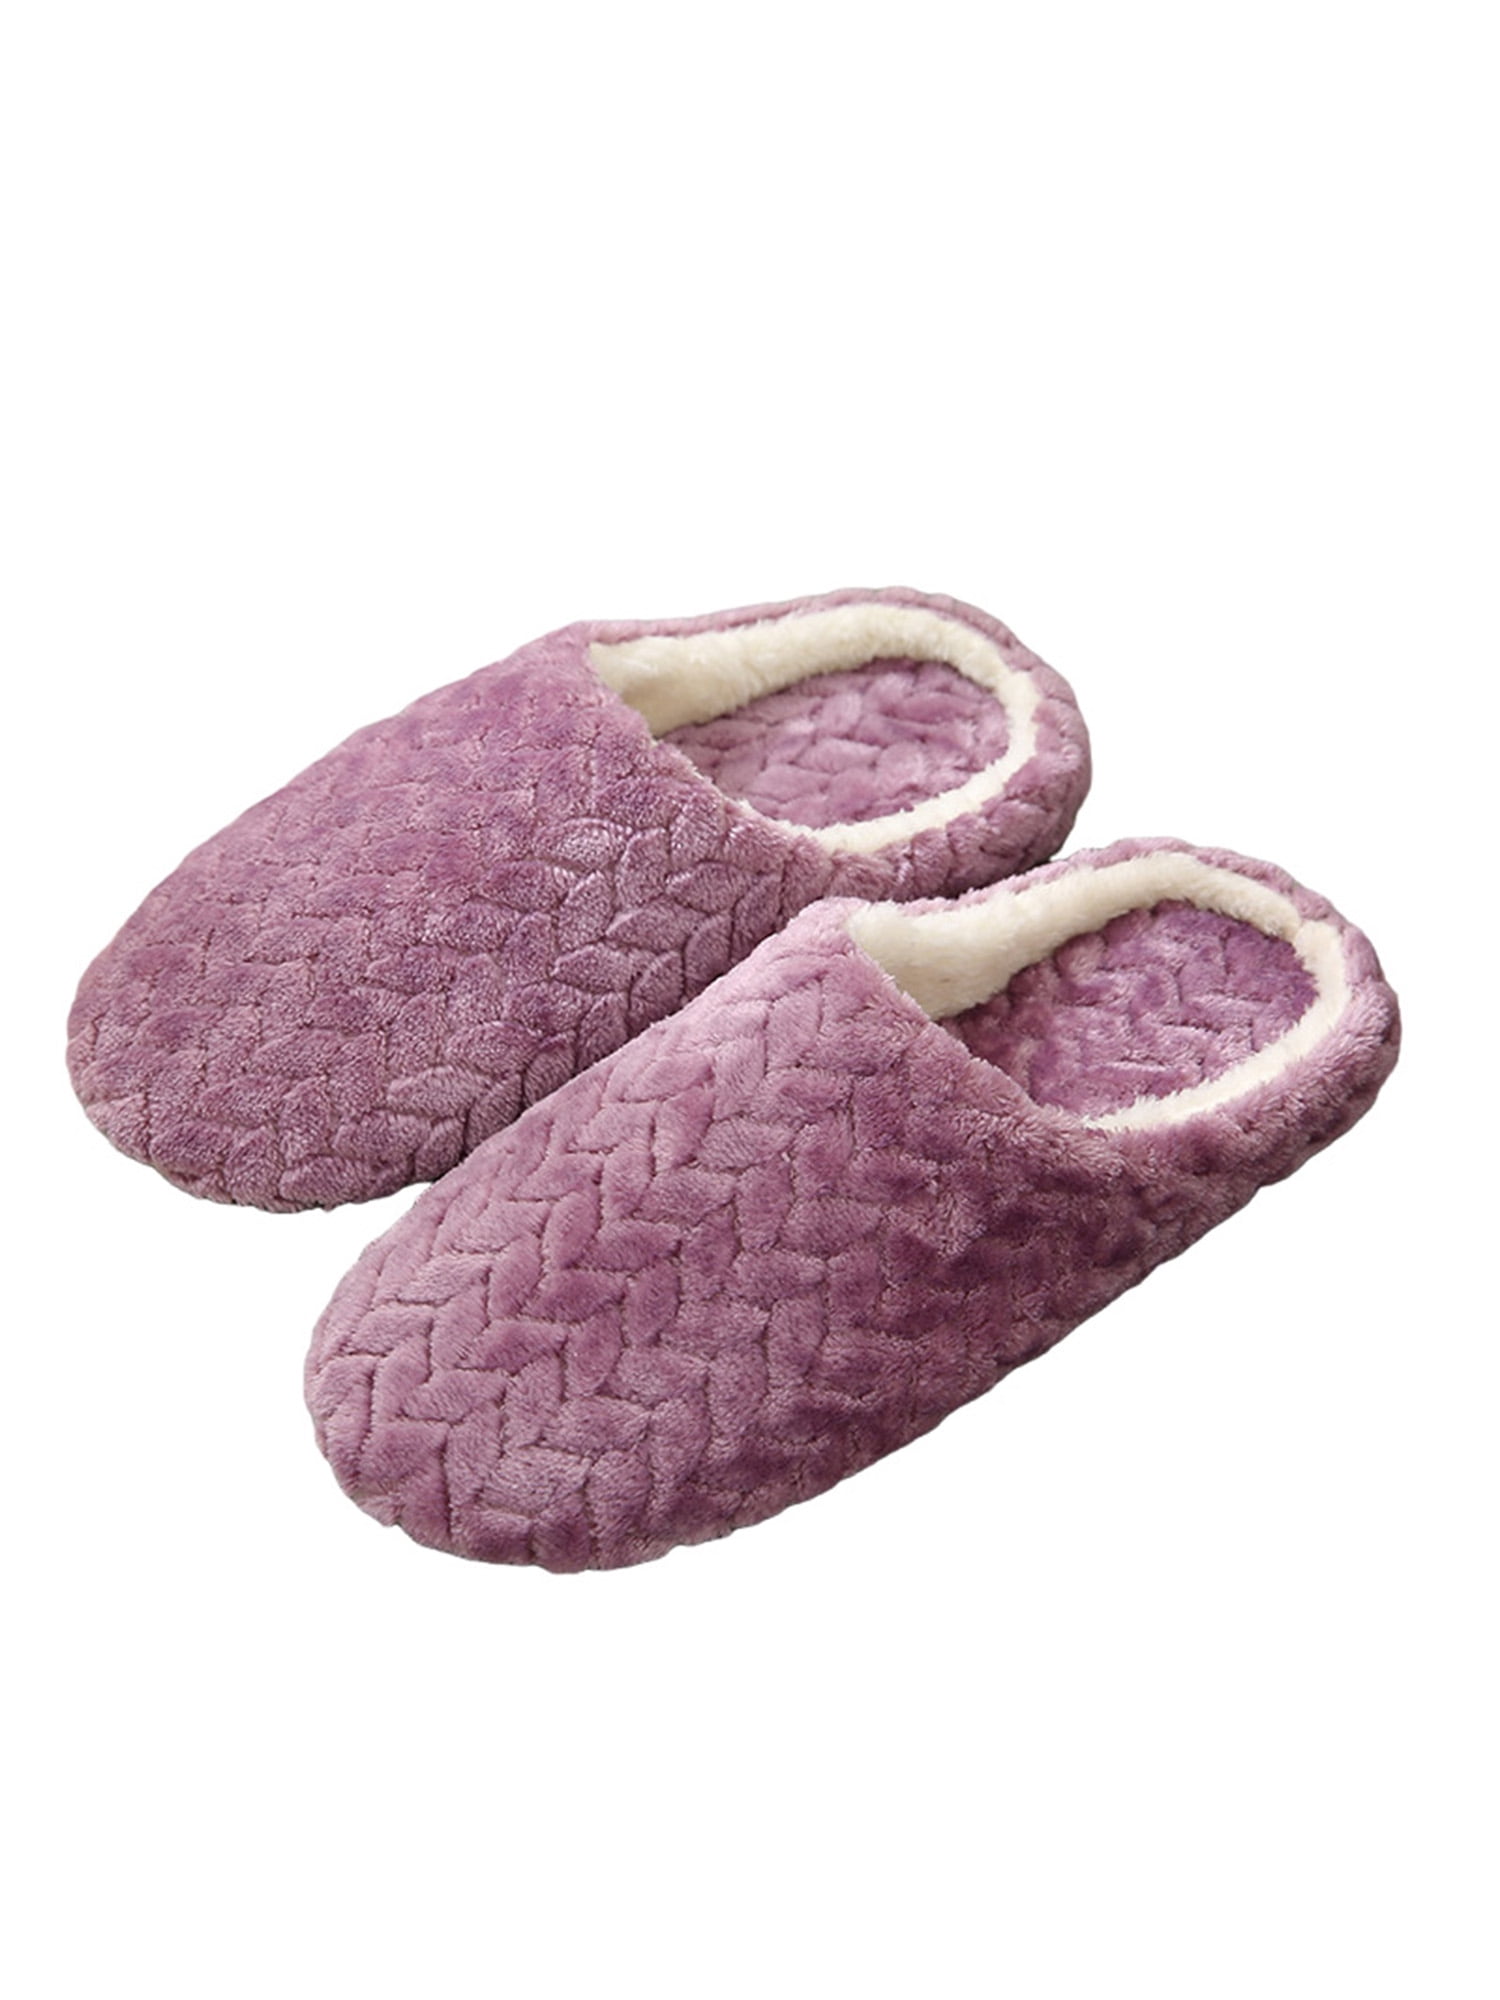 PajamaGram Soft Flip Flop Slippers Washable Fuzzy Womens Slippers 